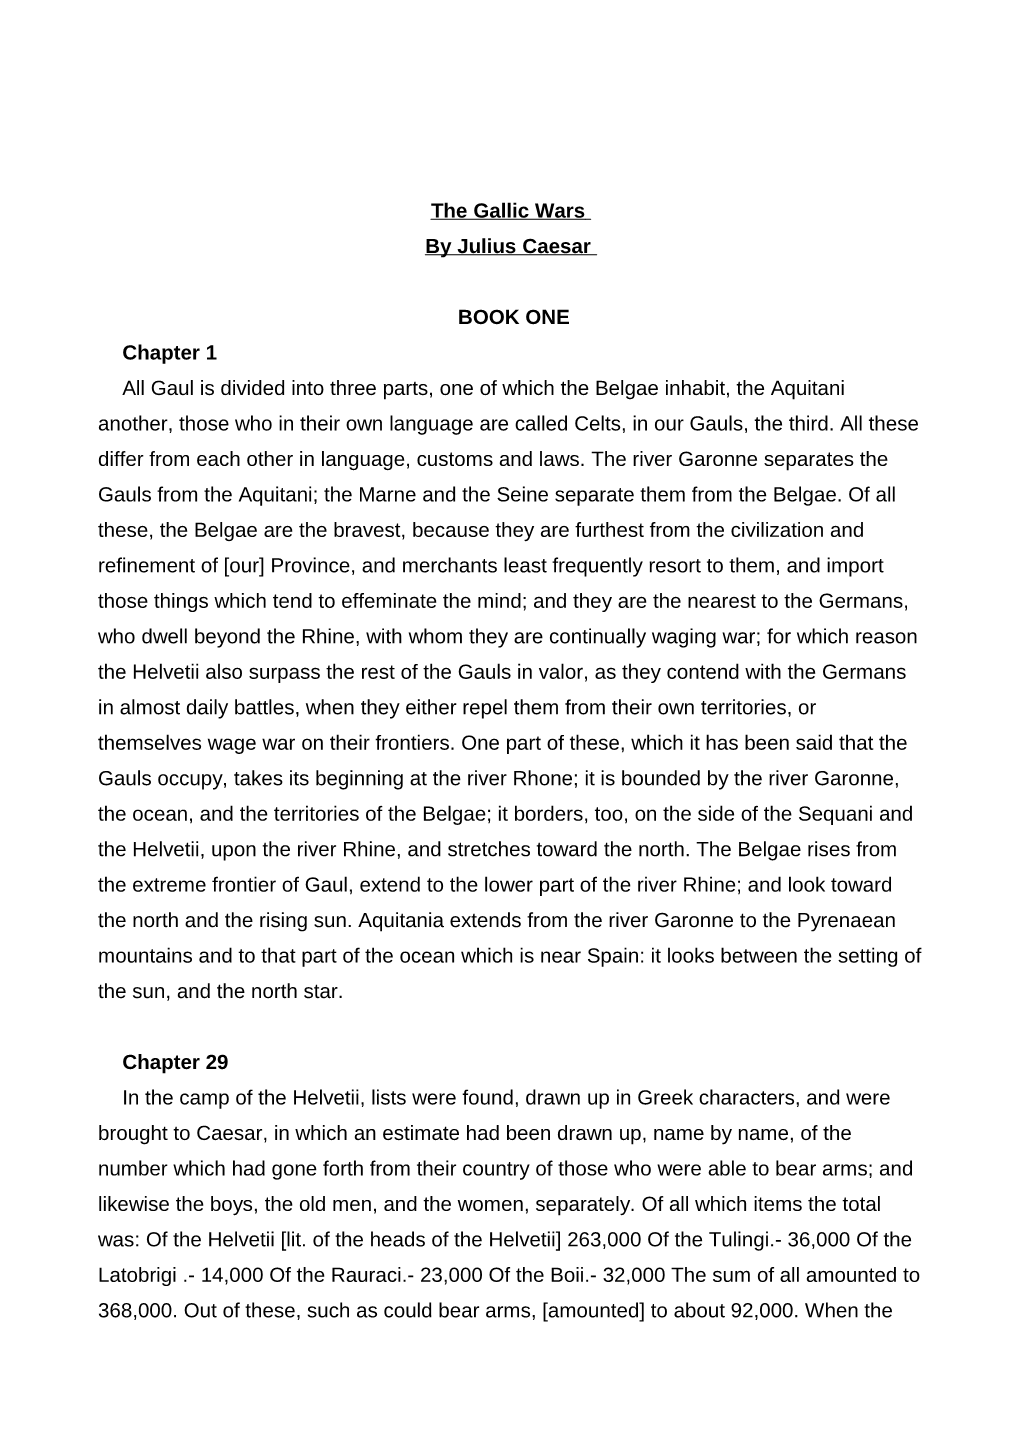 The Gallic Wars by Julius Caesar BOOK ONE Chapter 1 All Gaul Is